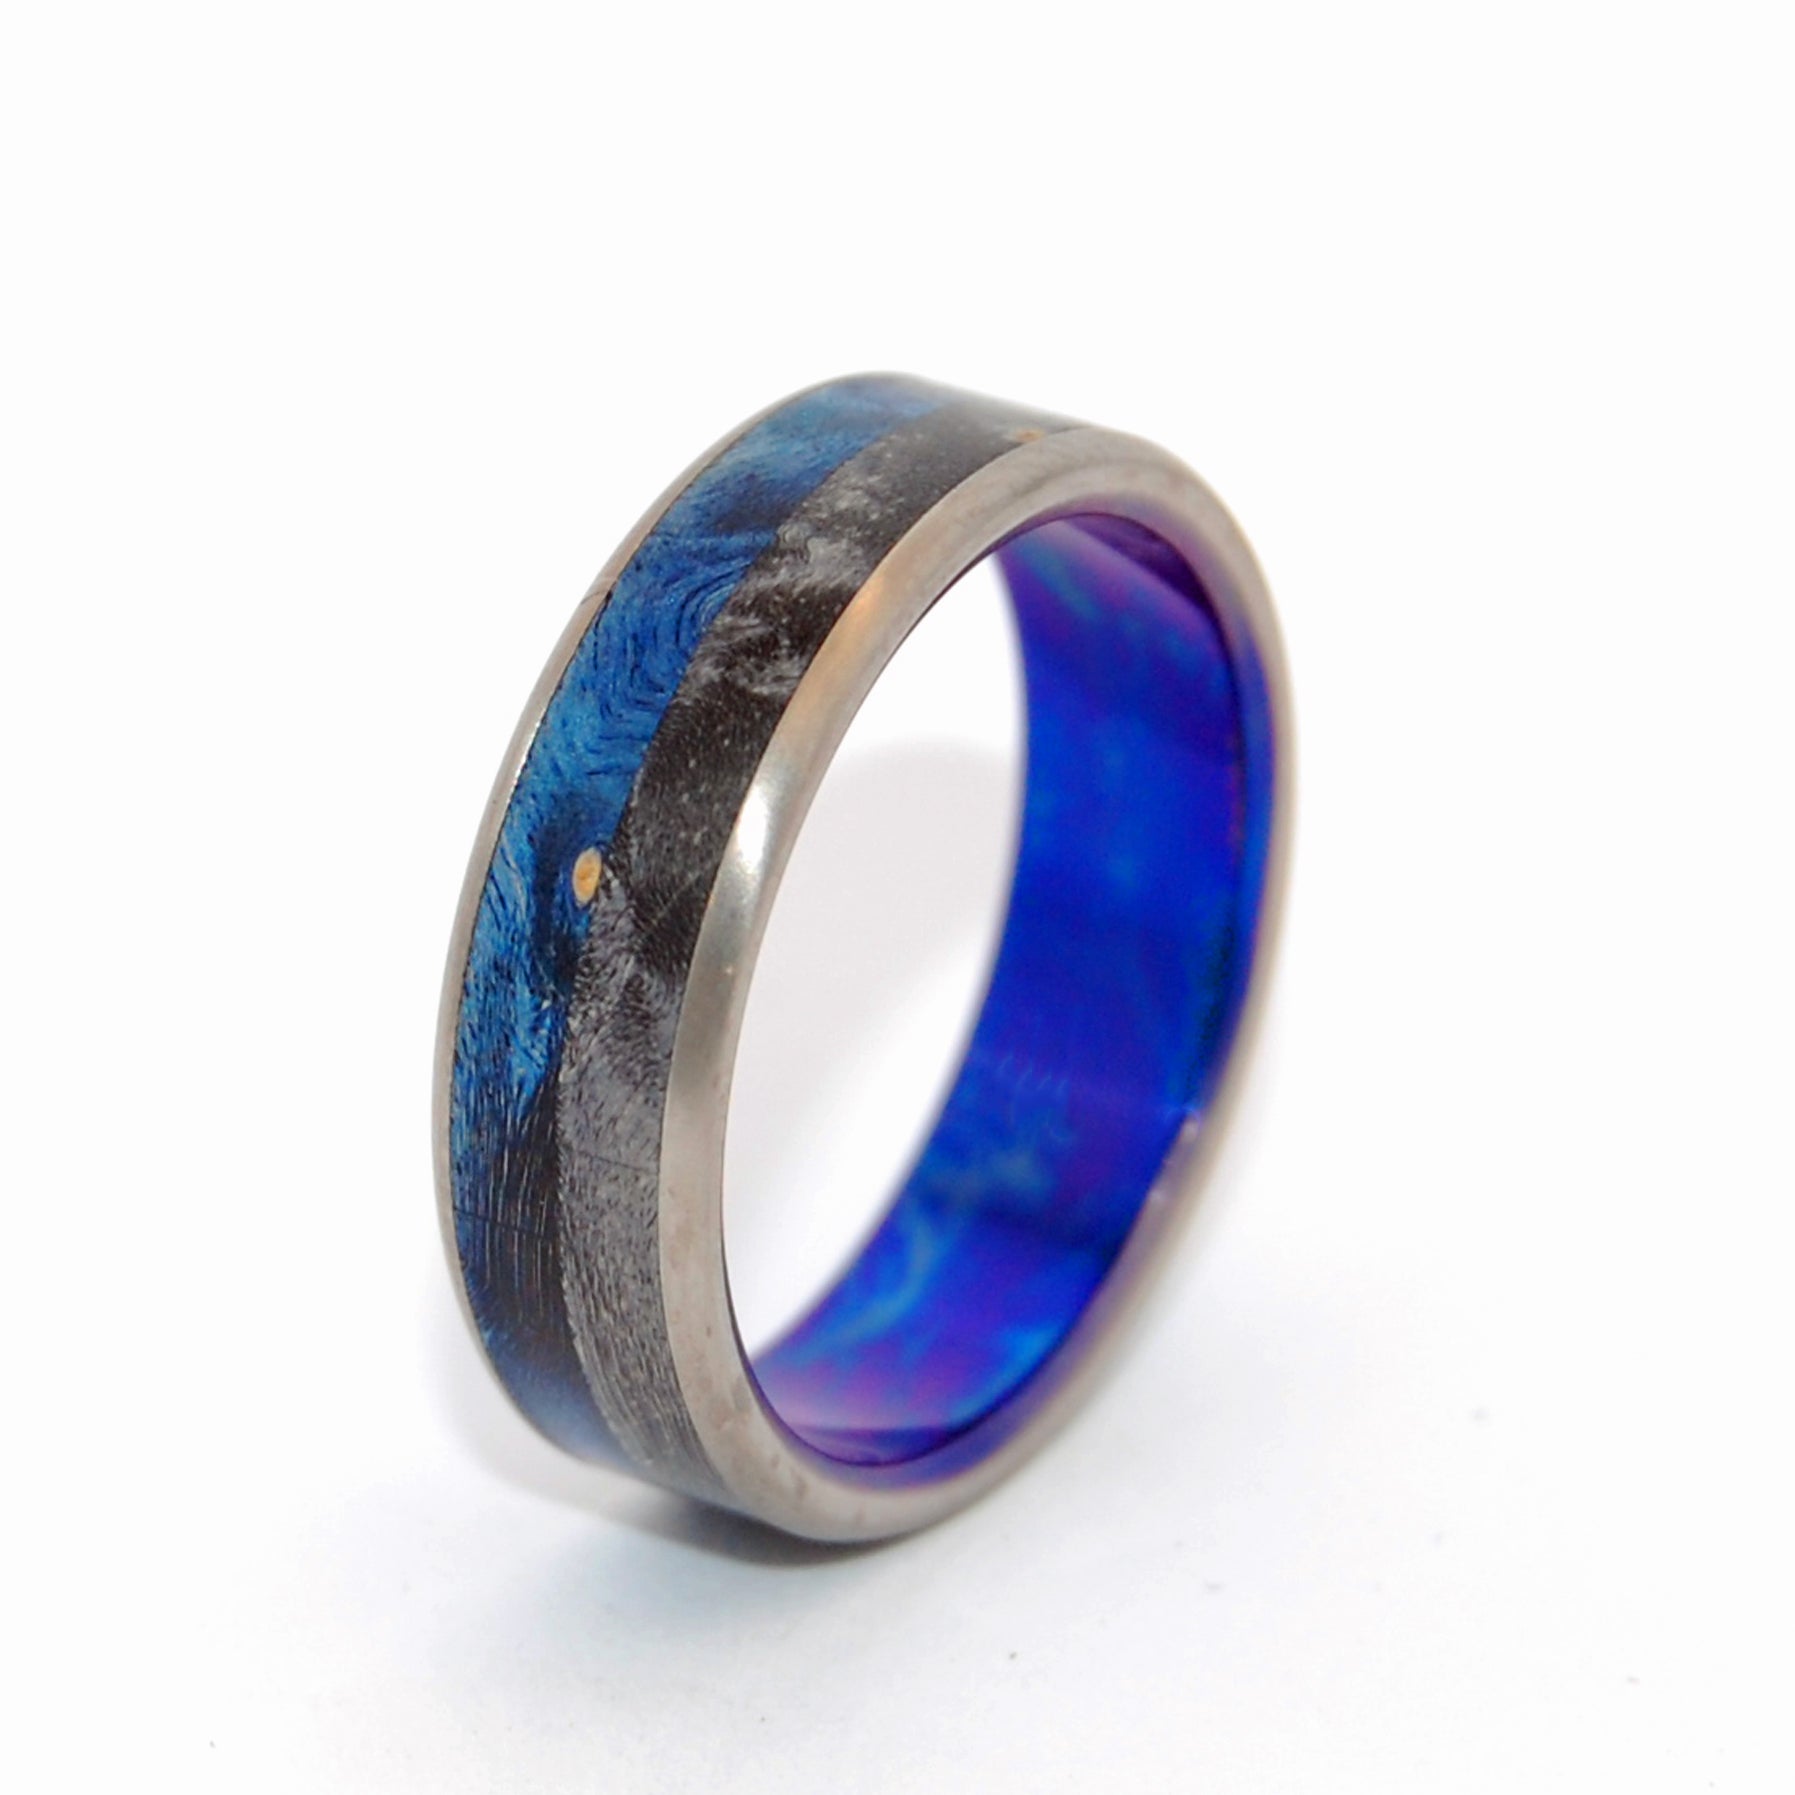 Take Me | Wood and Hand Anodized Blue - Titanium Wedding Ring - Minter and Richter Designs